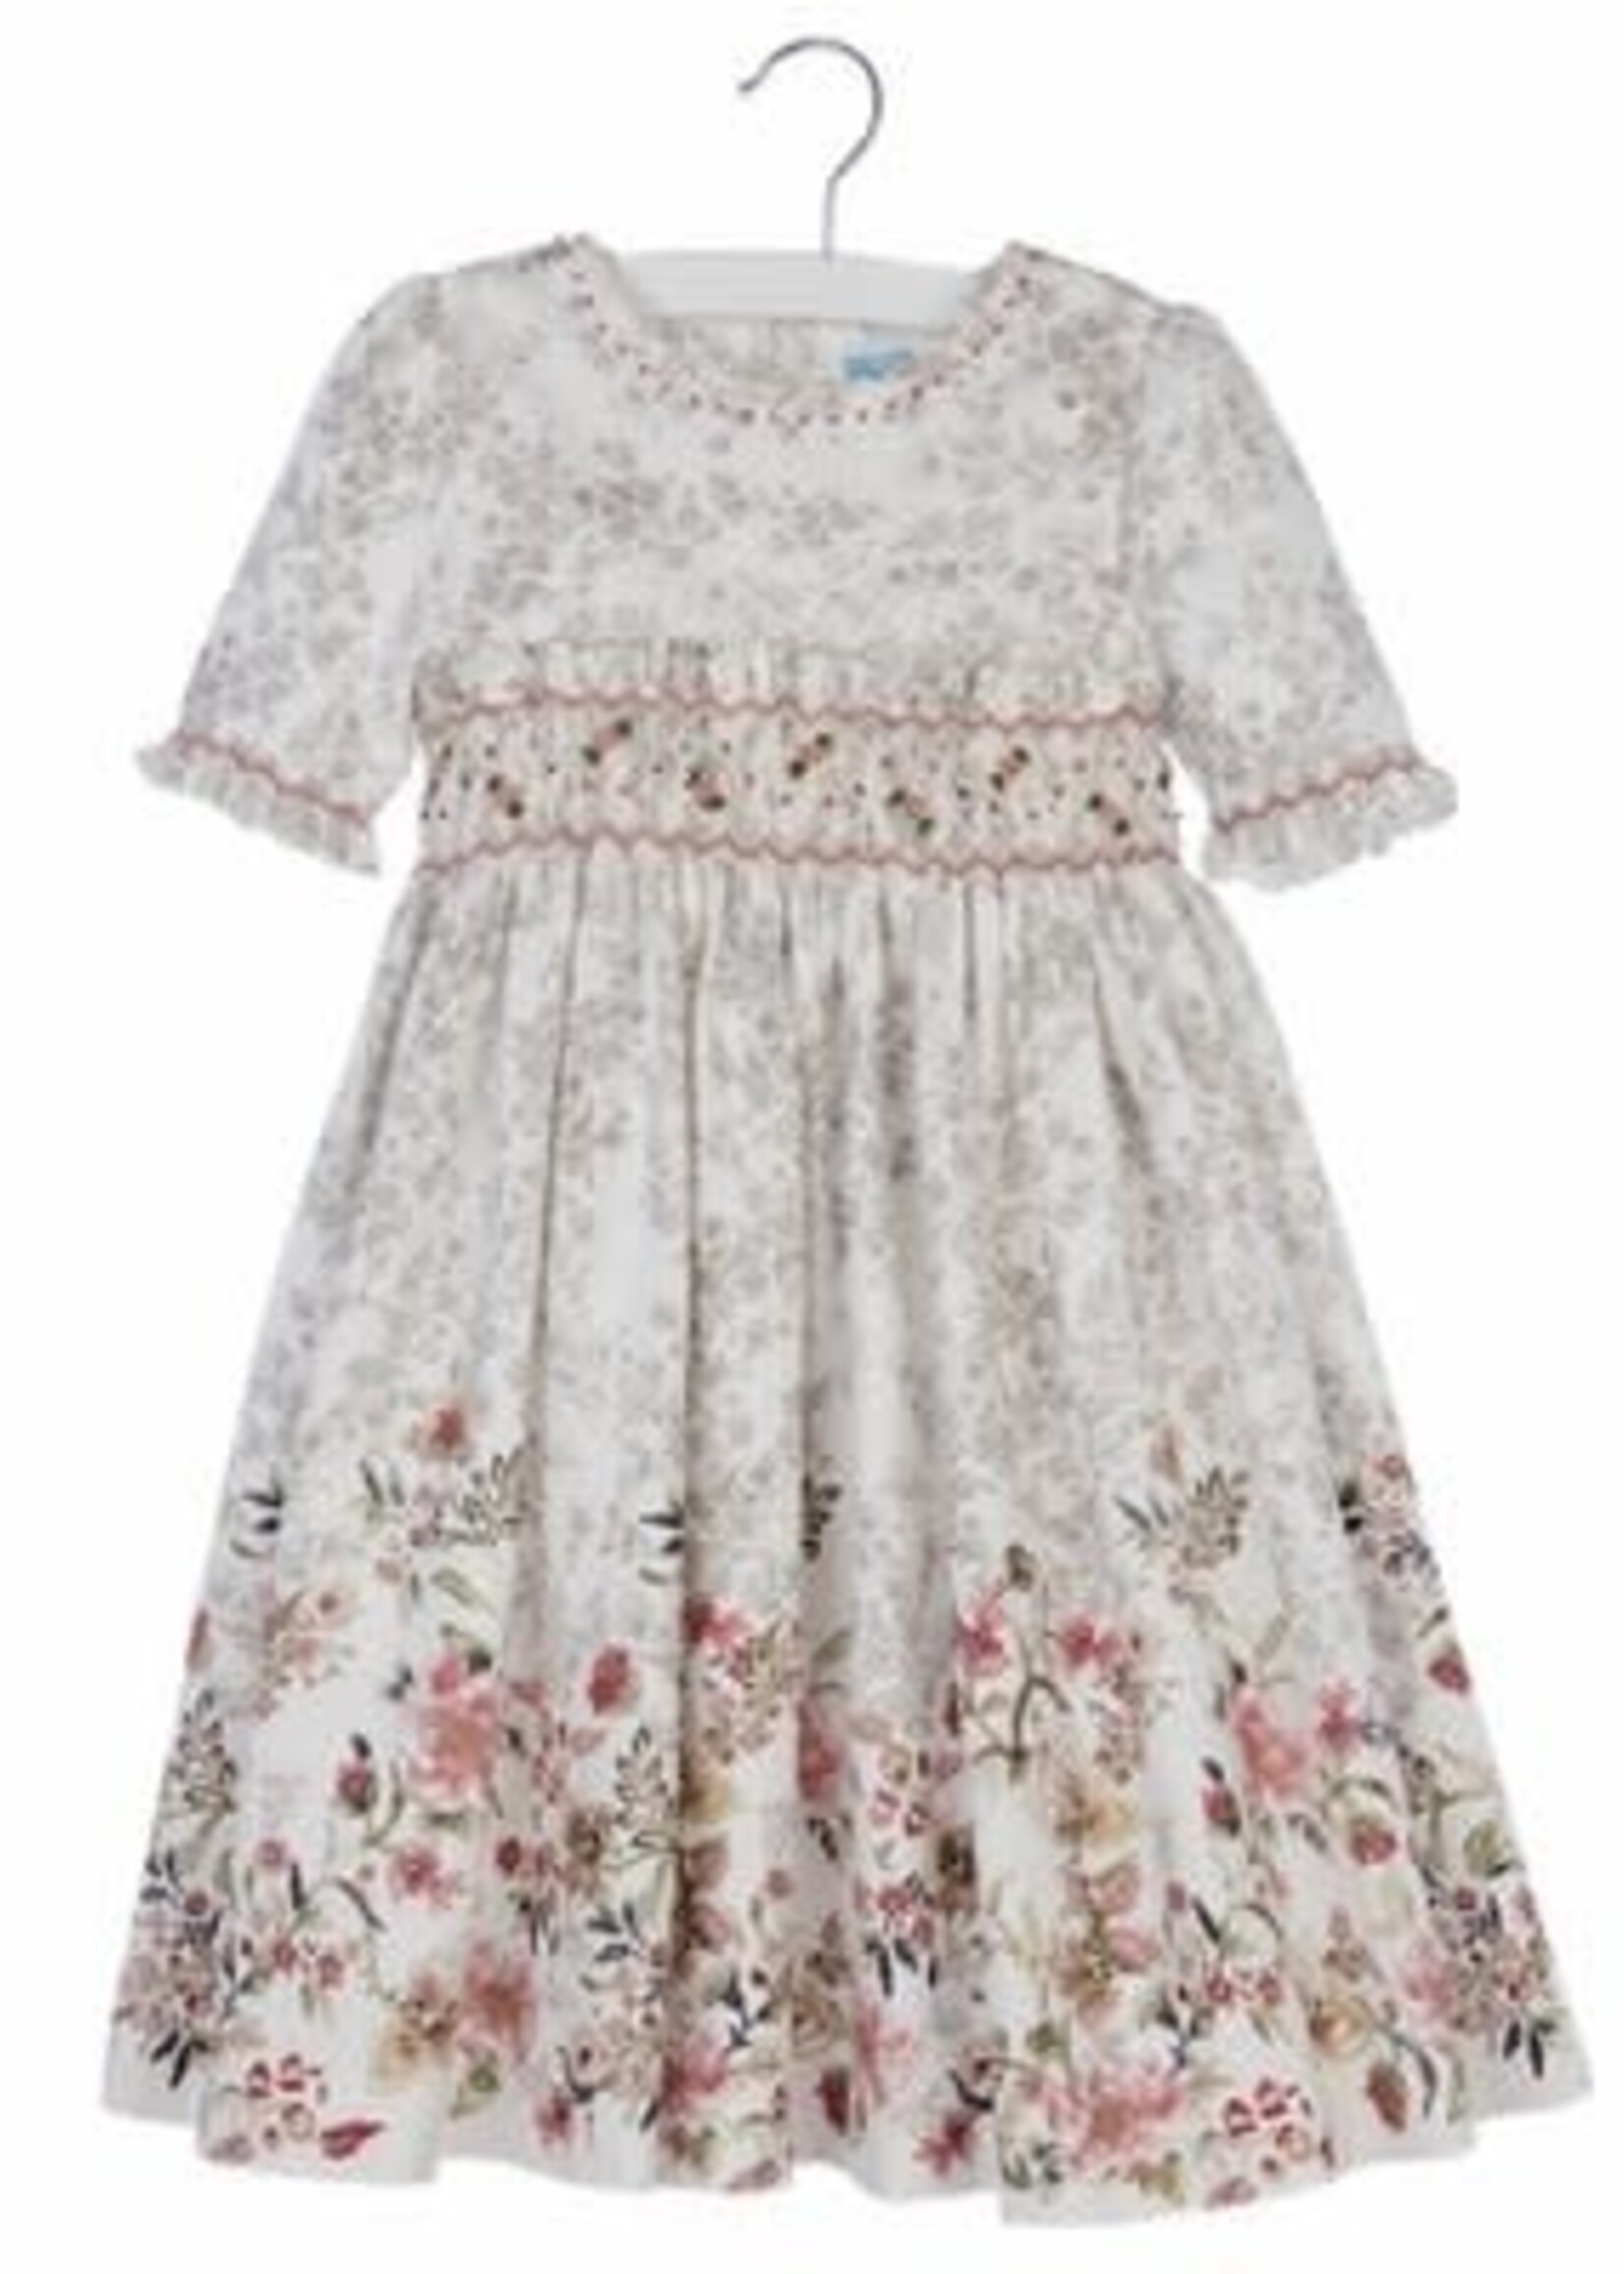 Smocked Grey Toile Dress w/Dusty Pink Floral Border